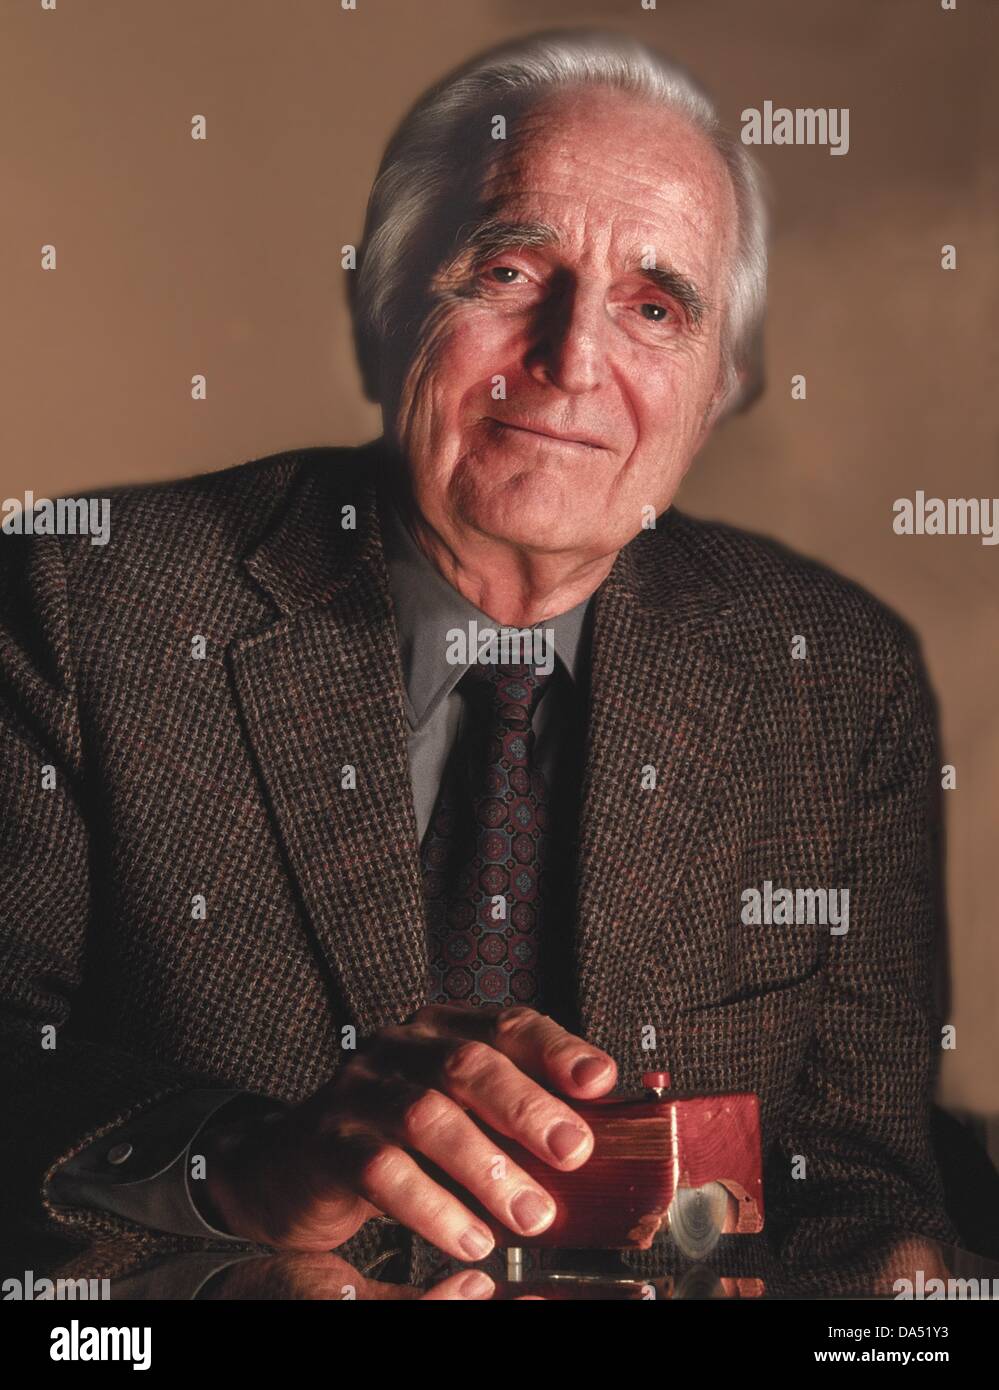 July 3, 2013 - FILE - DOUGLAS C. ENGELBART, one of the inventors of the computer mouse and a computer visionary, has died at the age of 88. PICTURED: July 8, 2004 - San Francisco, California, U.S - With his first prototype which was carved out of a wooden block, had wheels and a tiny red button. In 1970 he received a patent for the mouse pictured. (Credit Image: © Mark Richards/ZUMAPRESS.com) Stock Photo